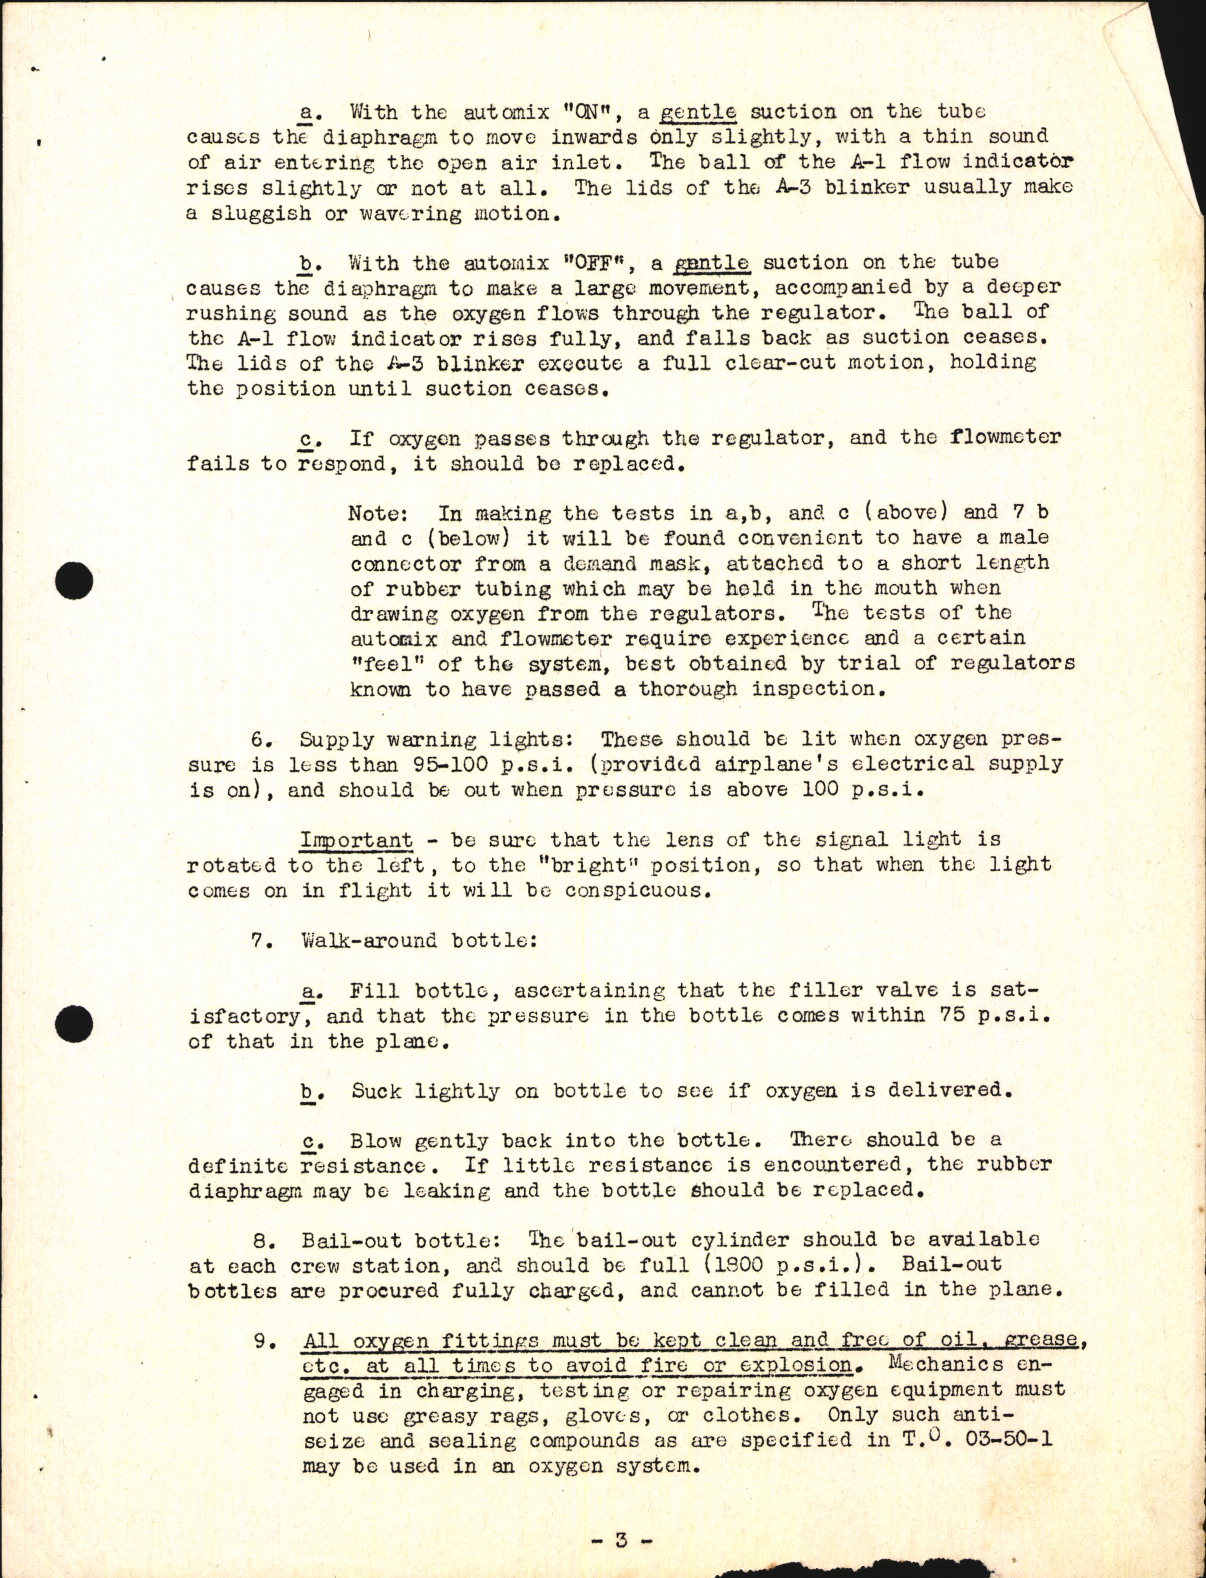 Sample page 5 from AirCorps Library document: Inspection Procedure for Demand Oxygen System in Airplanes